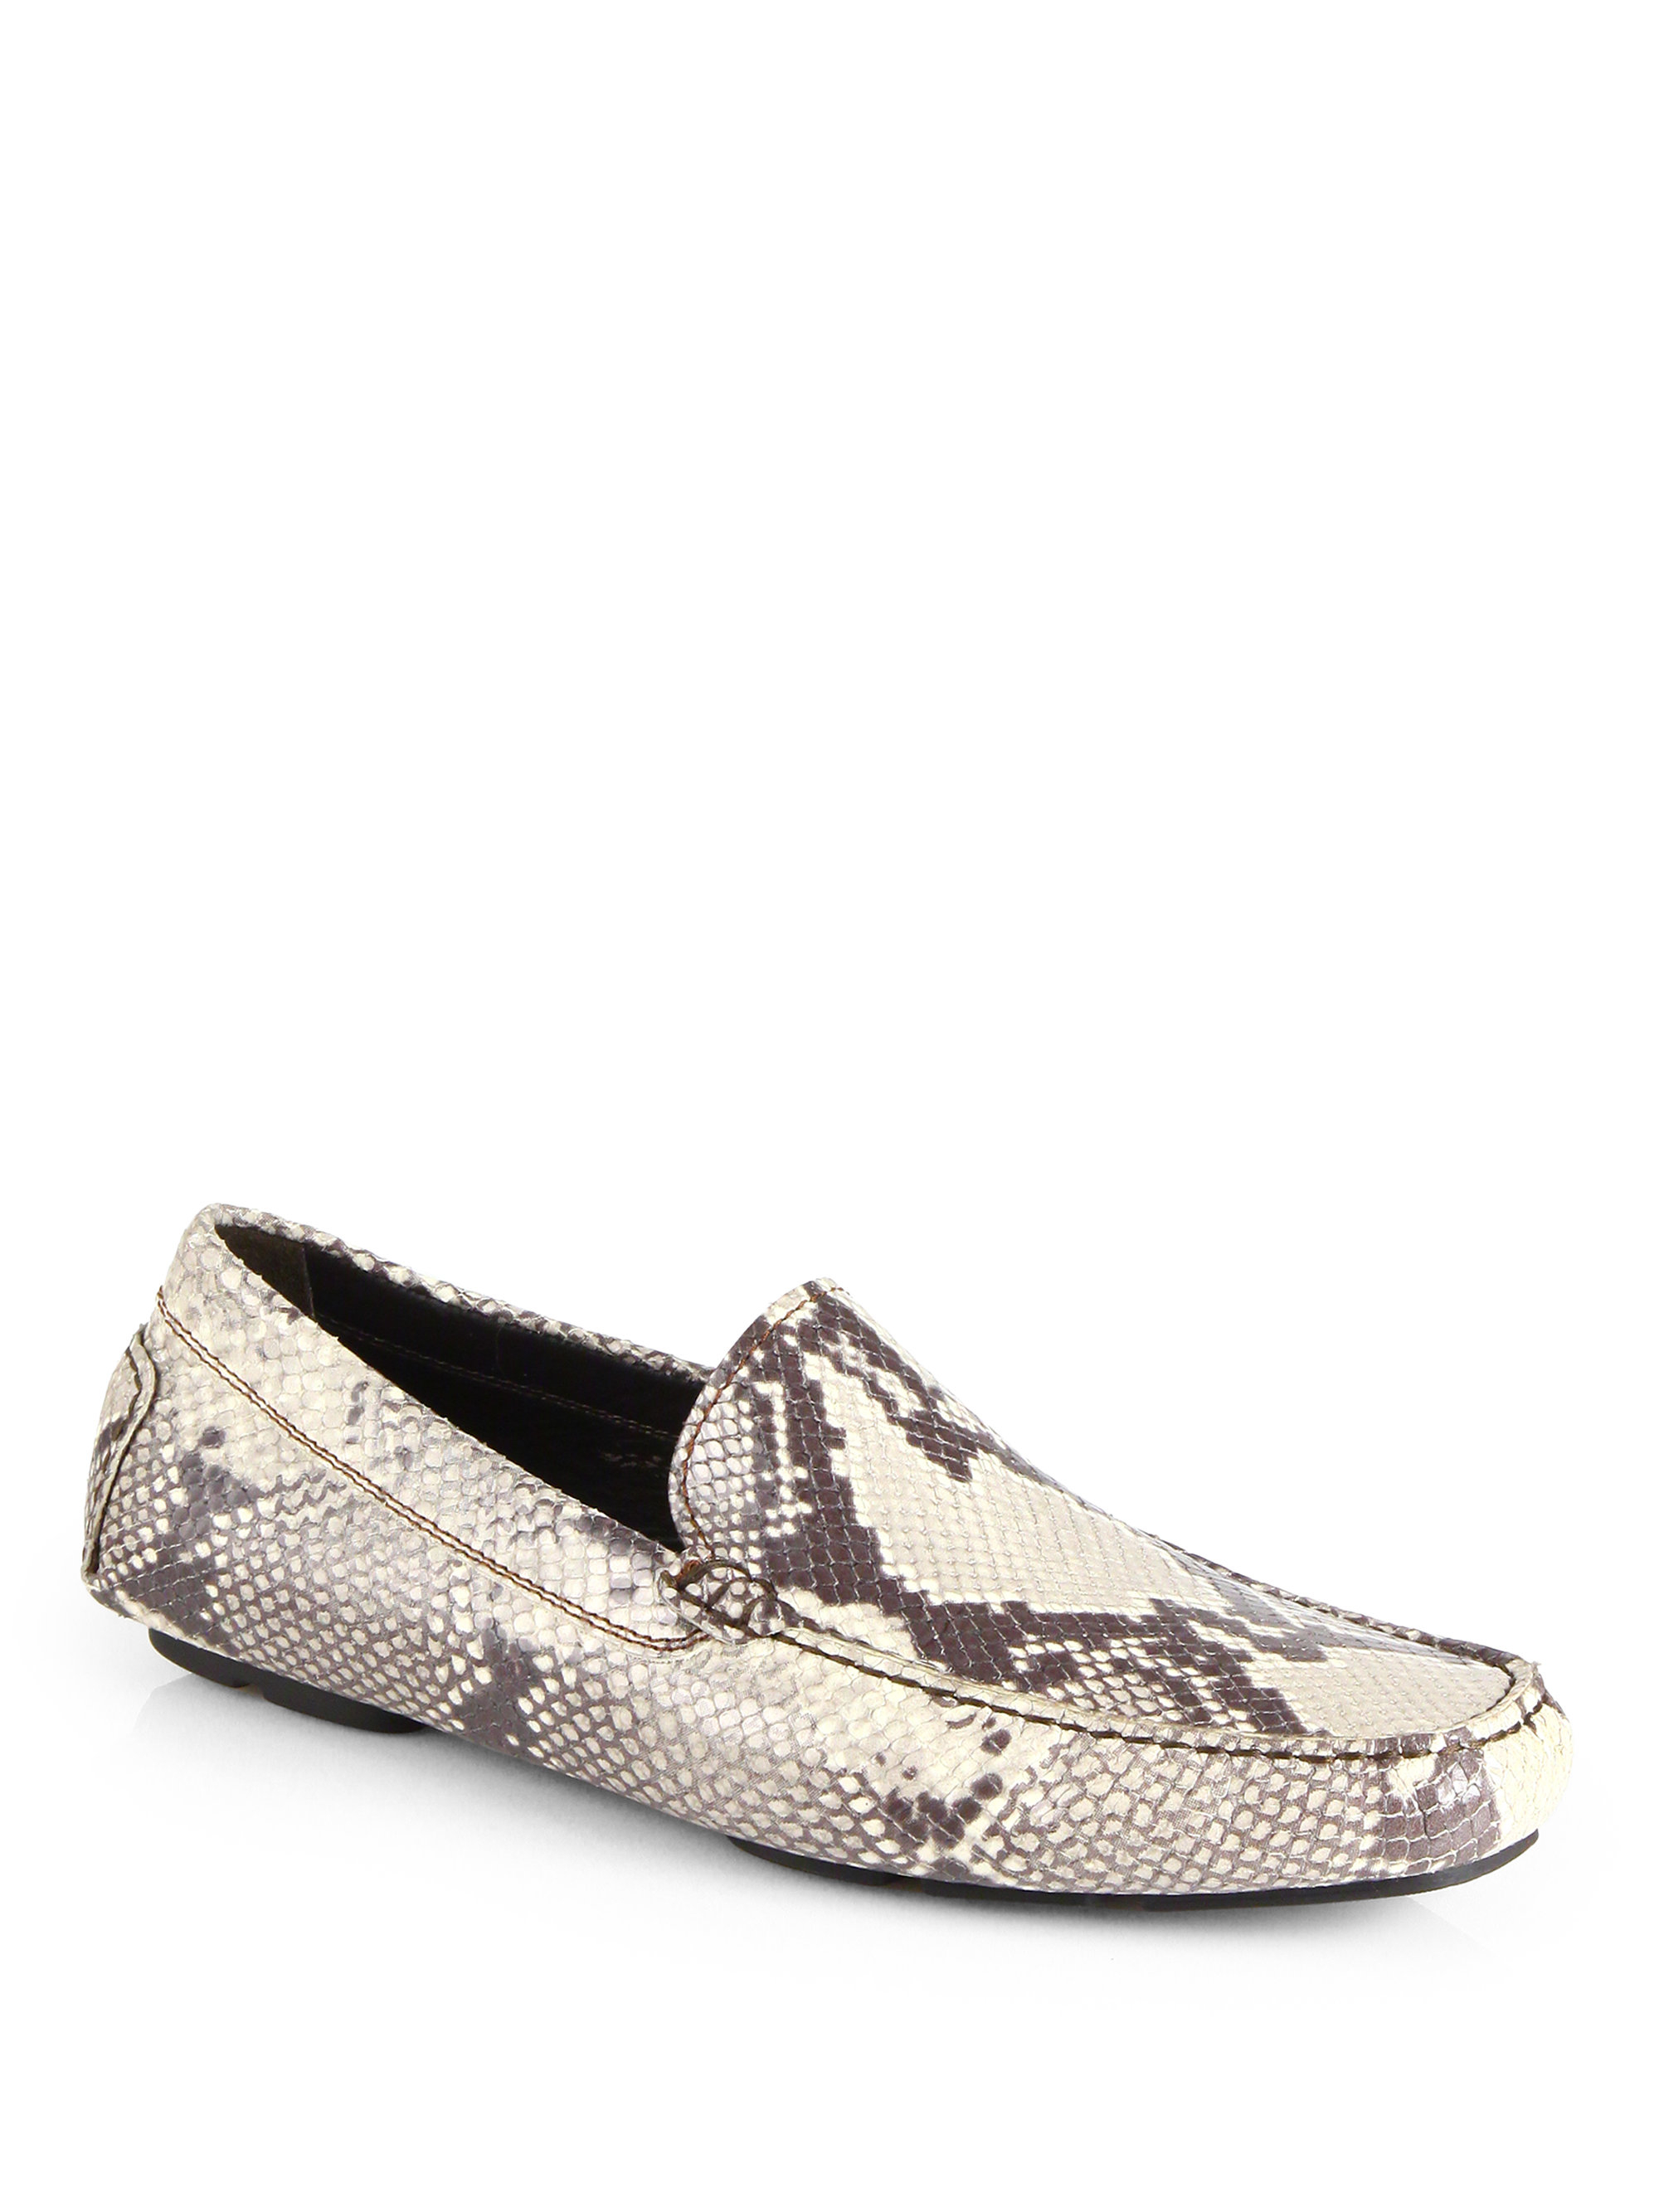 snakeskin driving shoes